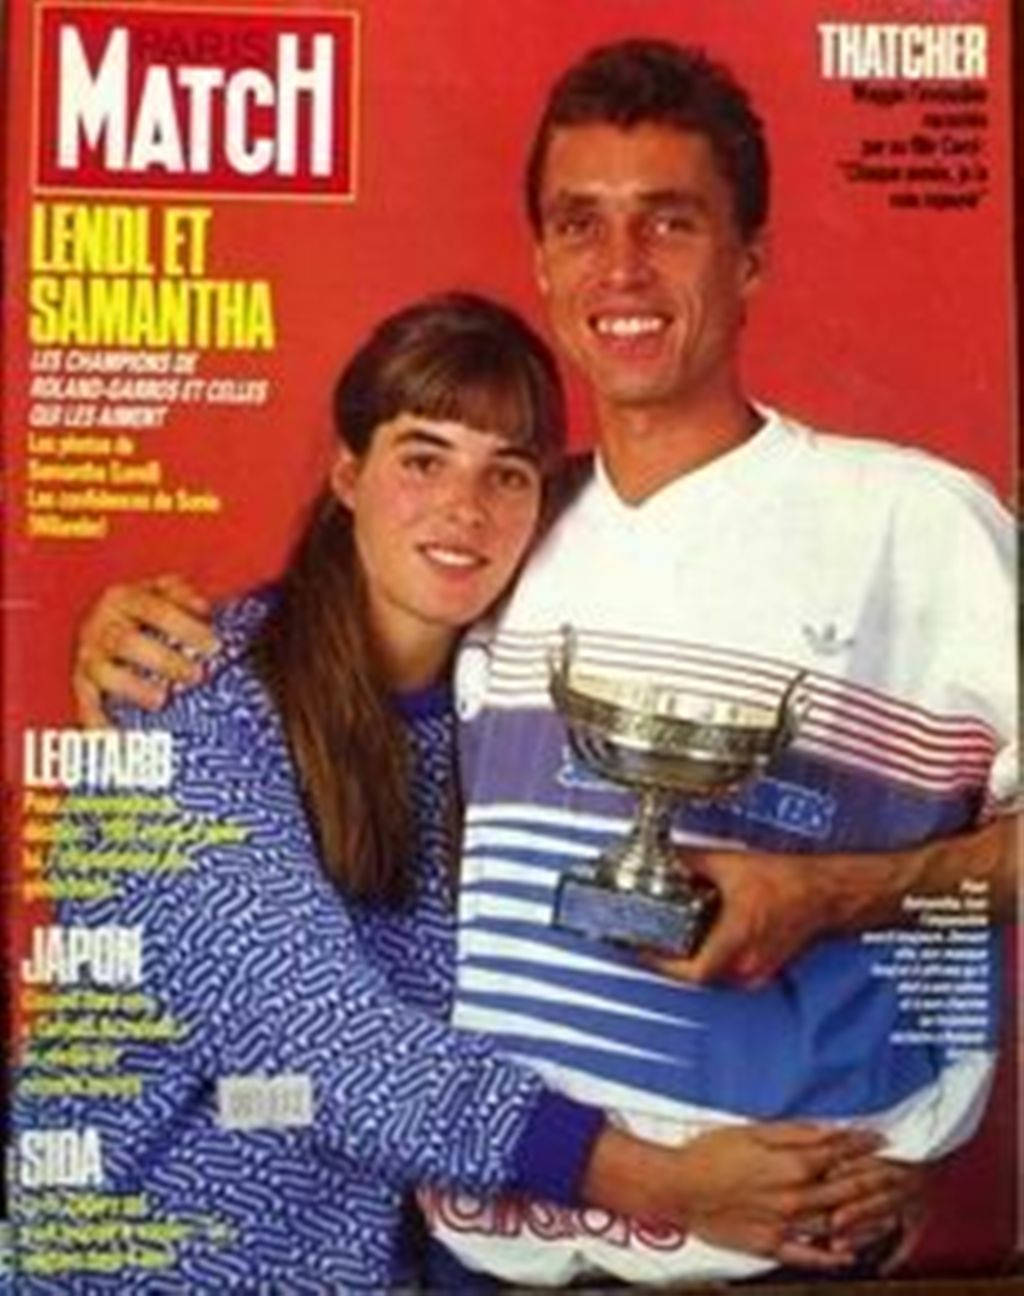 Ivanlendl Och Samantha Frankel. (there Is No Specific Context Given For Computer Or Mobile Wallpaper, So This Translates Simply As 